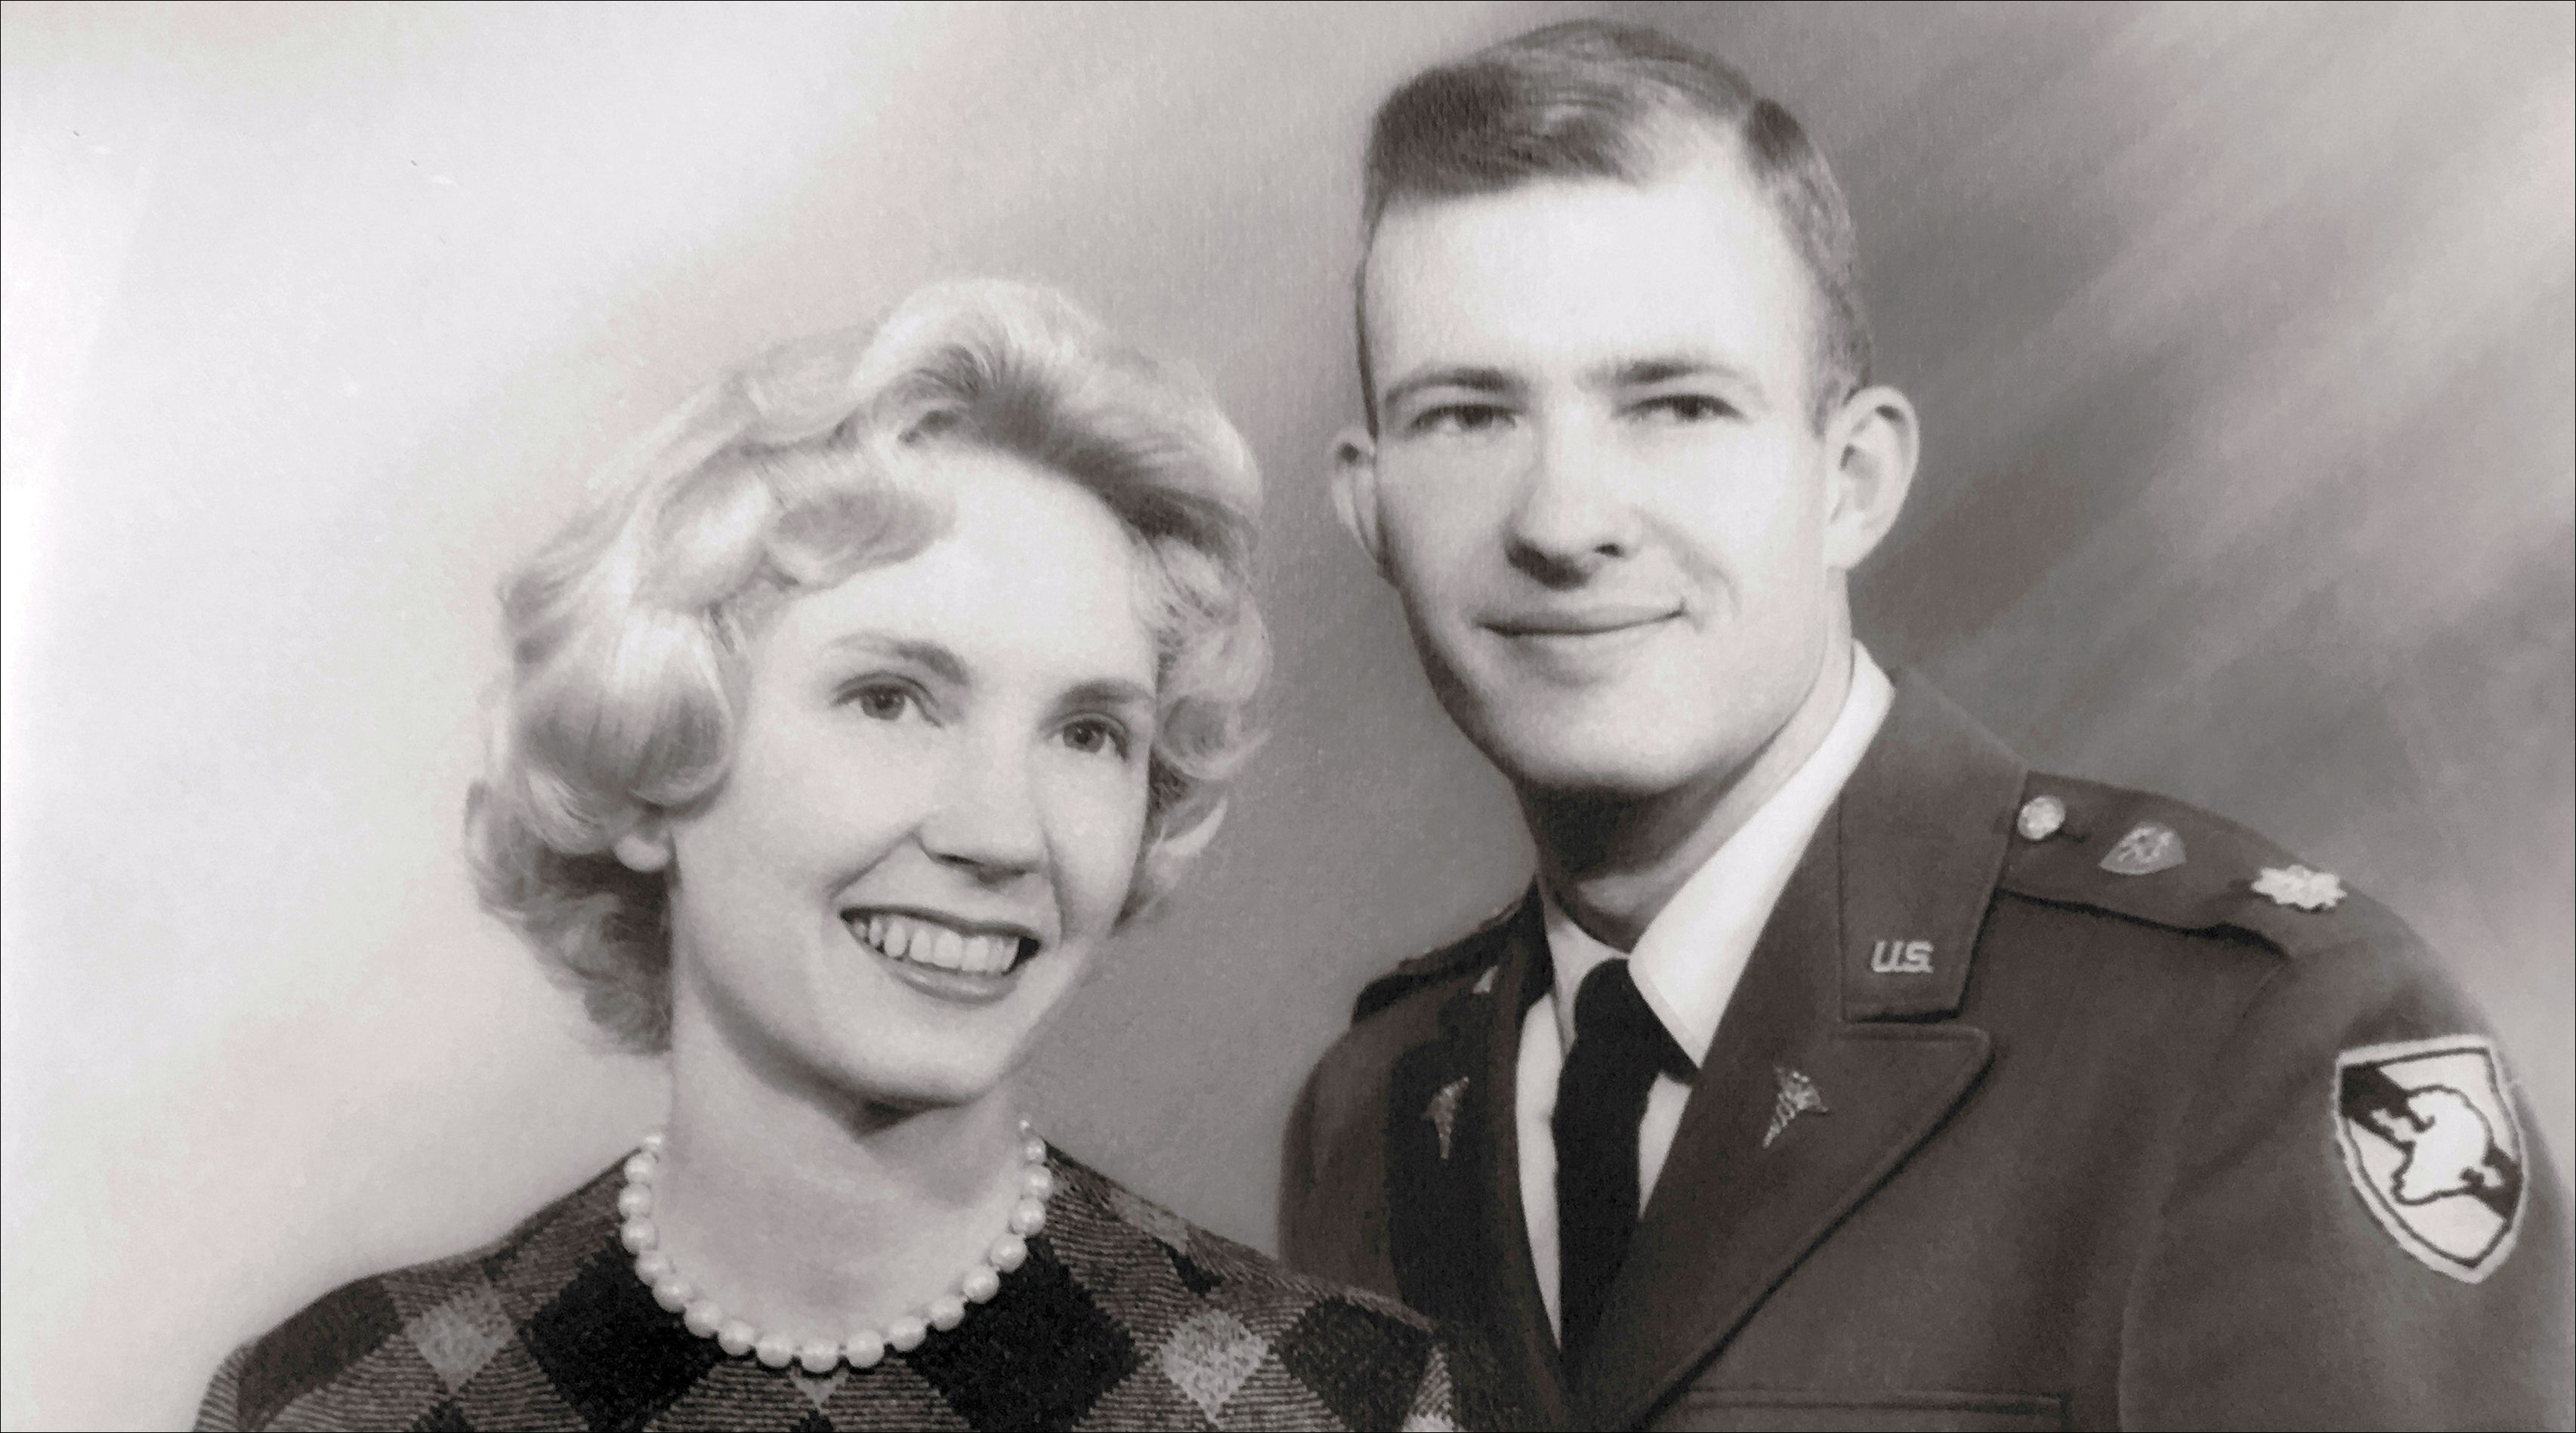 Major Dick Elander, the chief opthamologist at West Point, was on board the ill-fated flight along with his wife Lois.